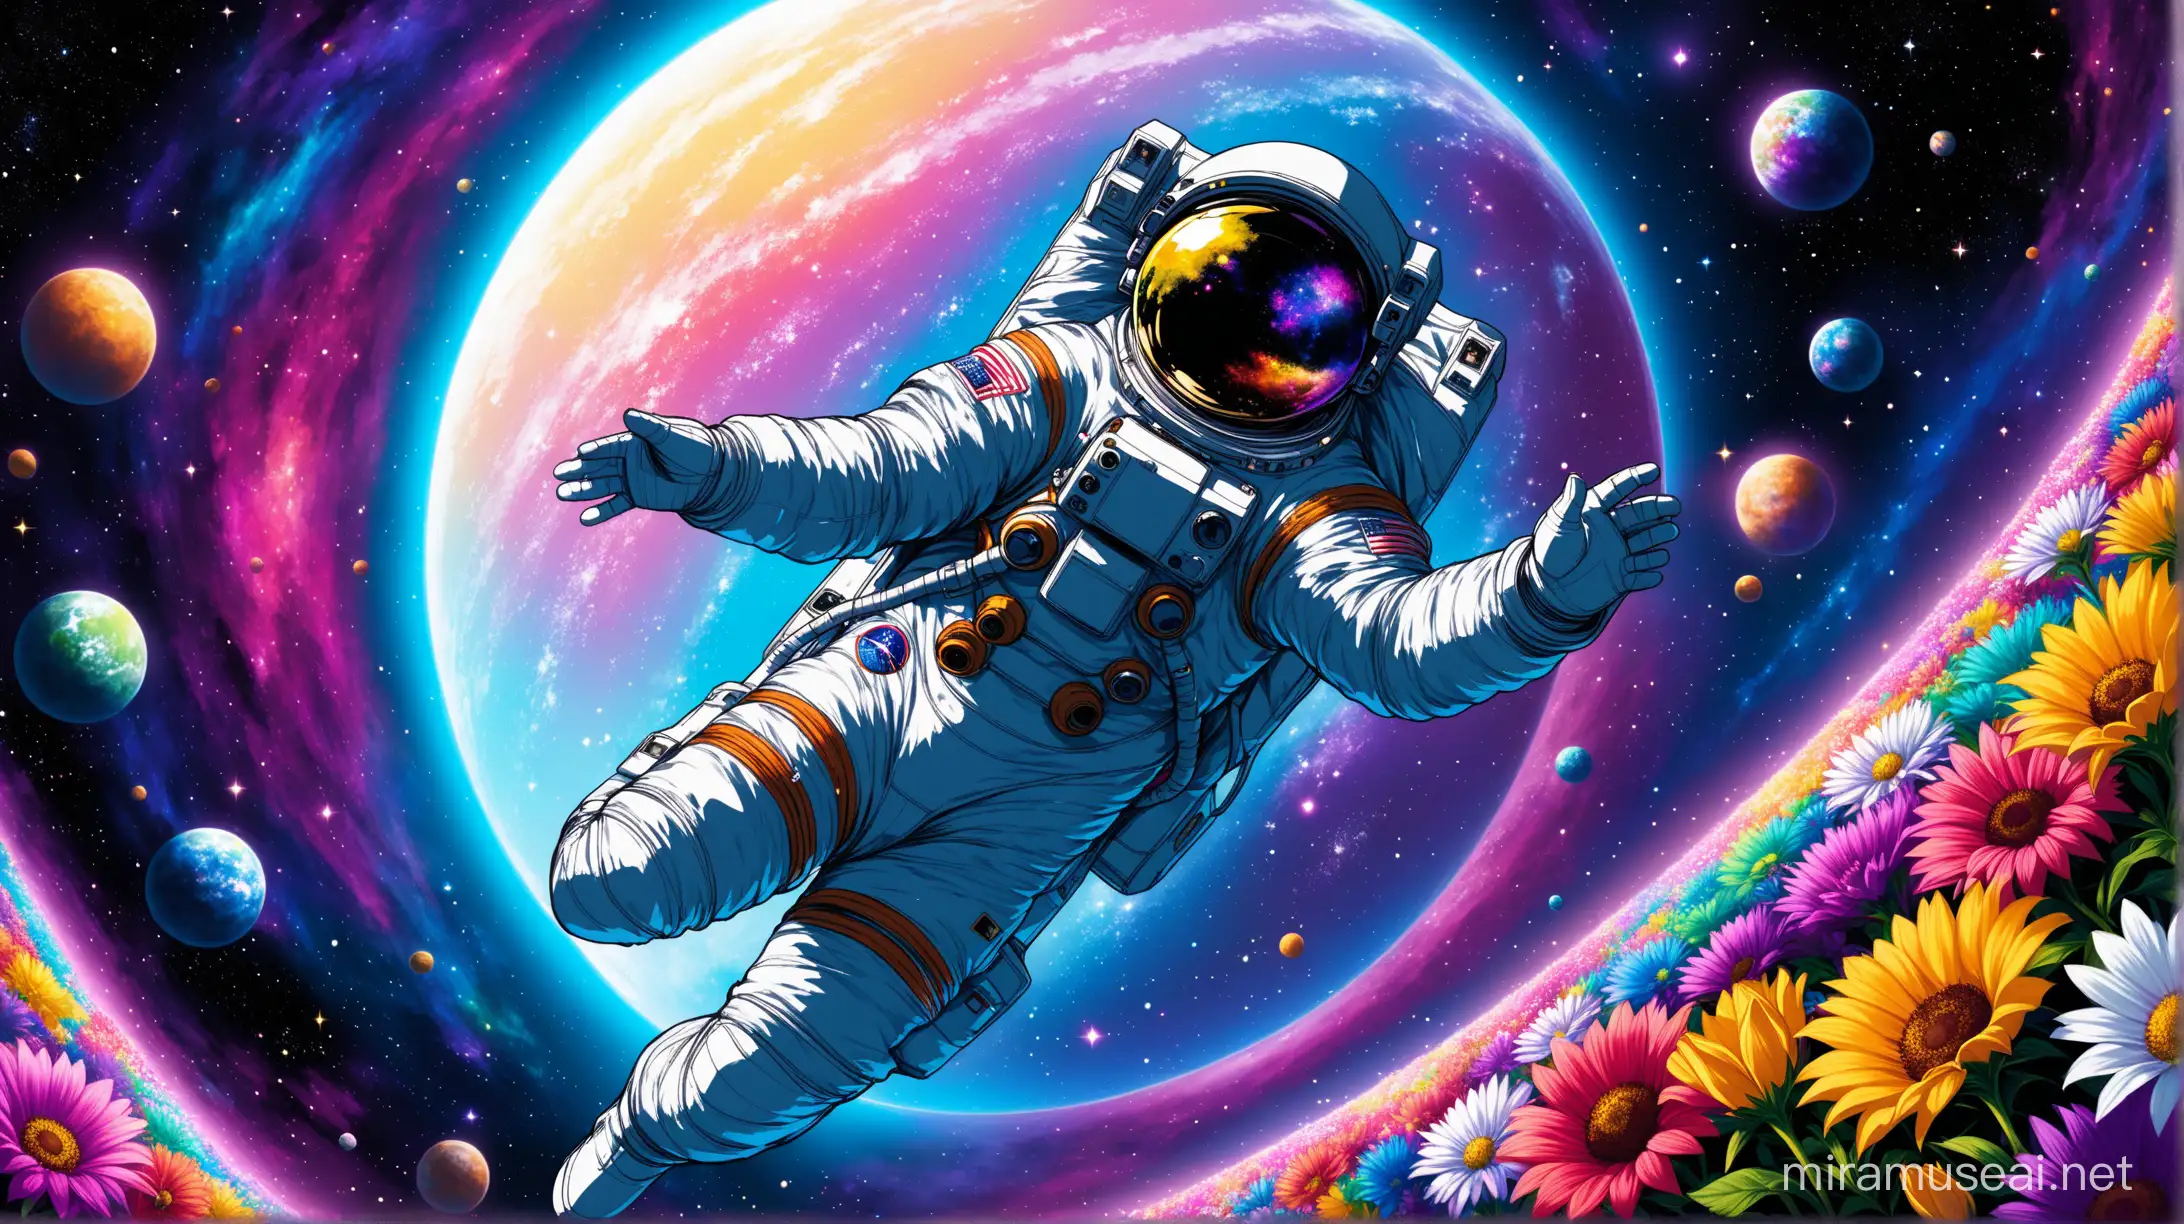 a man in space suit floating in the deep space, with a lot of colors and flowers around him